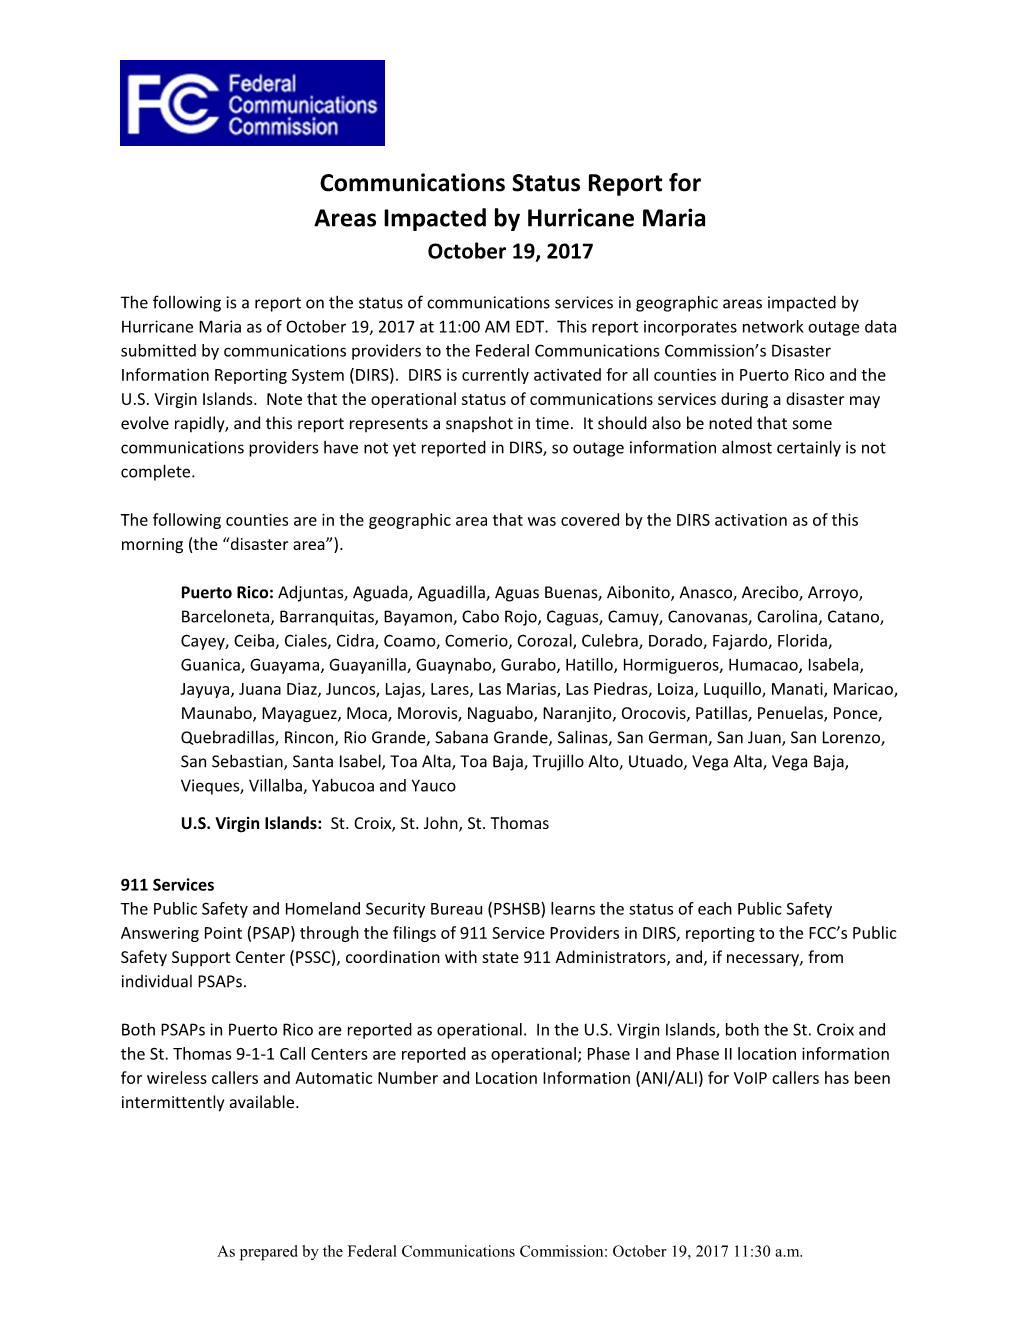 Communications Status Report for Areas Impacted by Hurricane Maria October 19, 2017